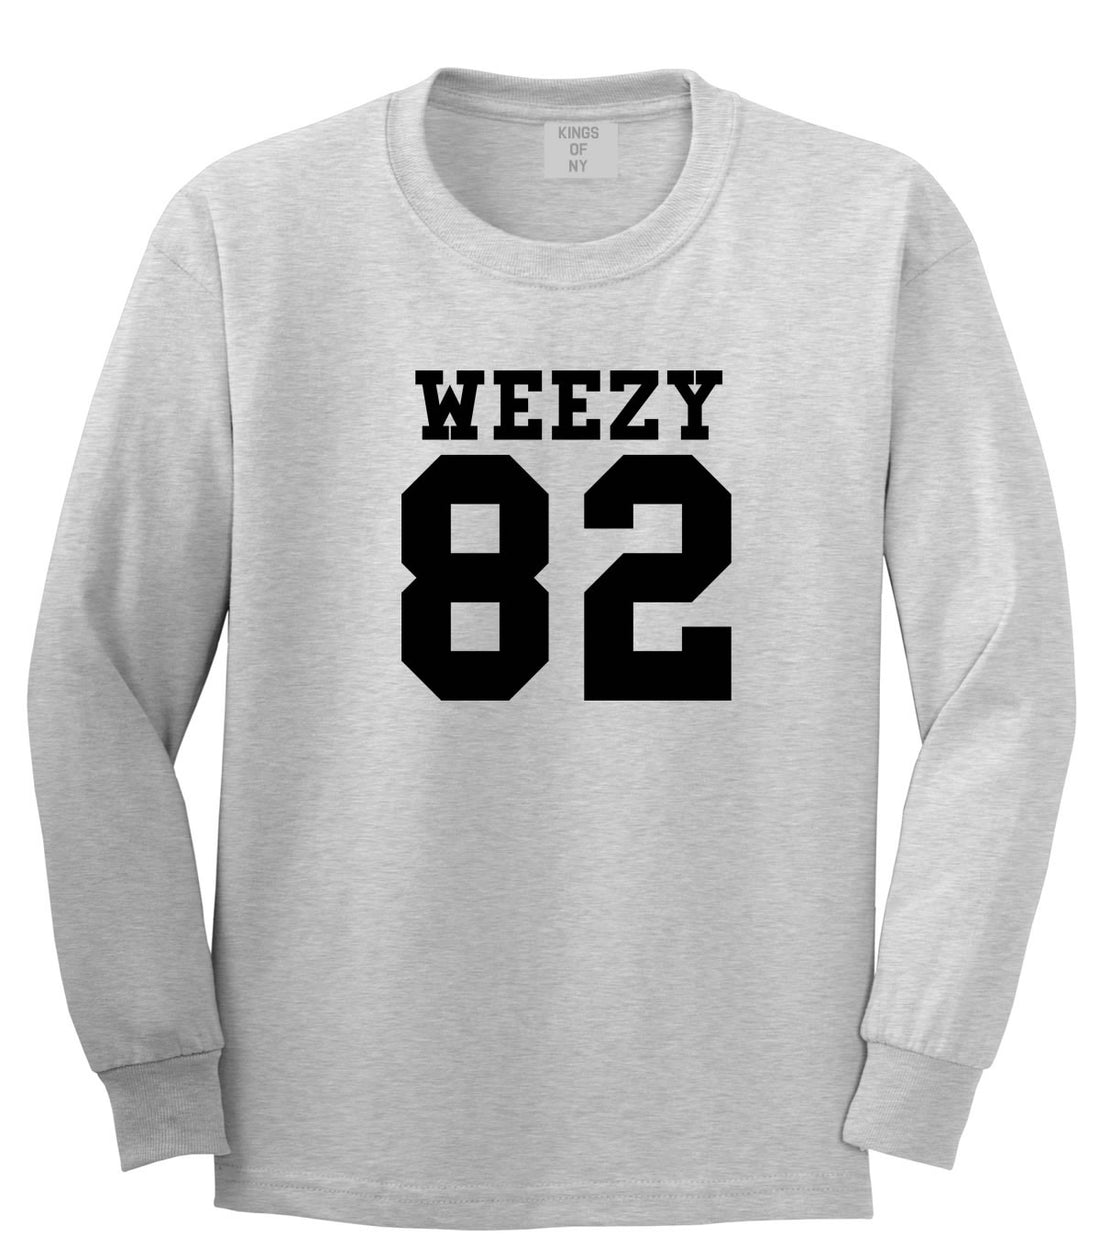 Weezy 82 Team Long Sleeve T-Shirt in Grey by Kings Of NY